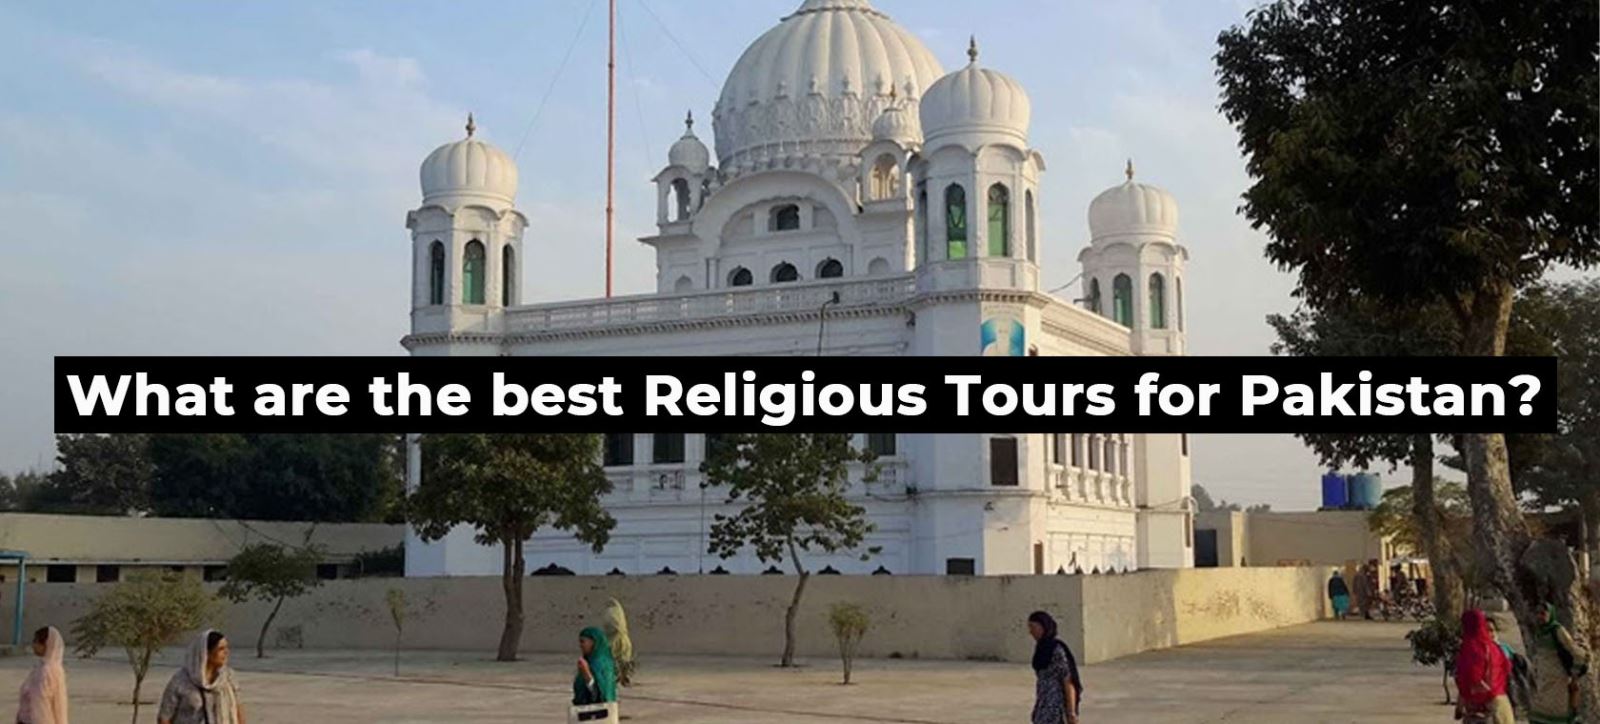 What are the best Religious Tours for Pakistan?